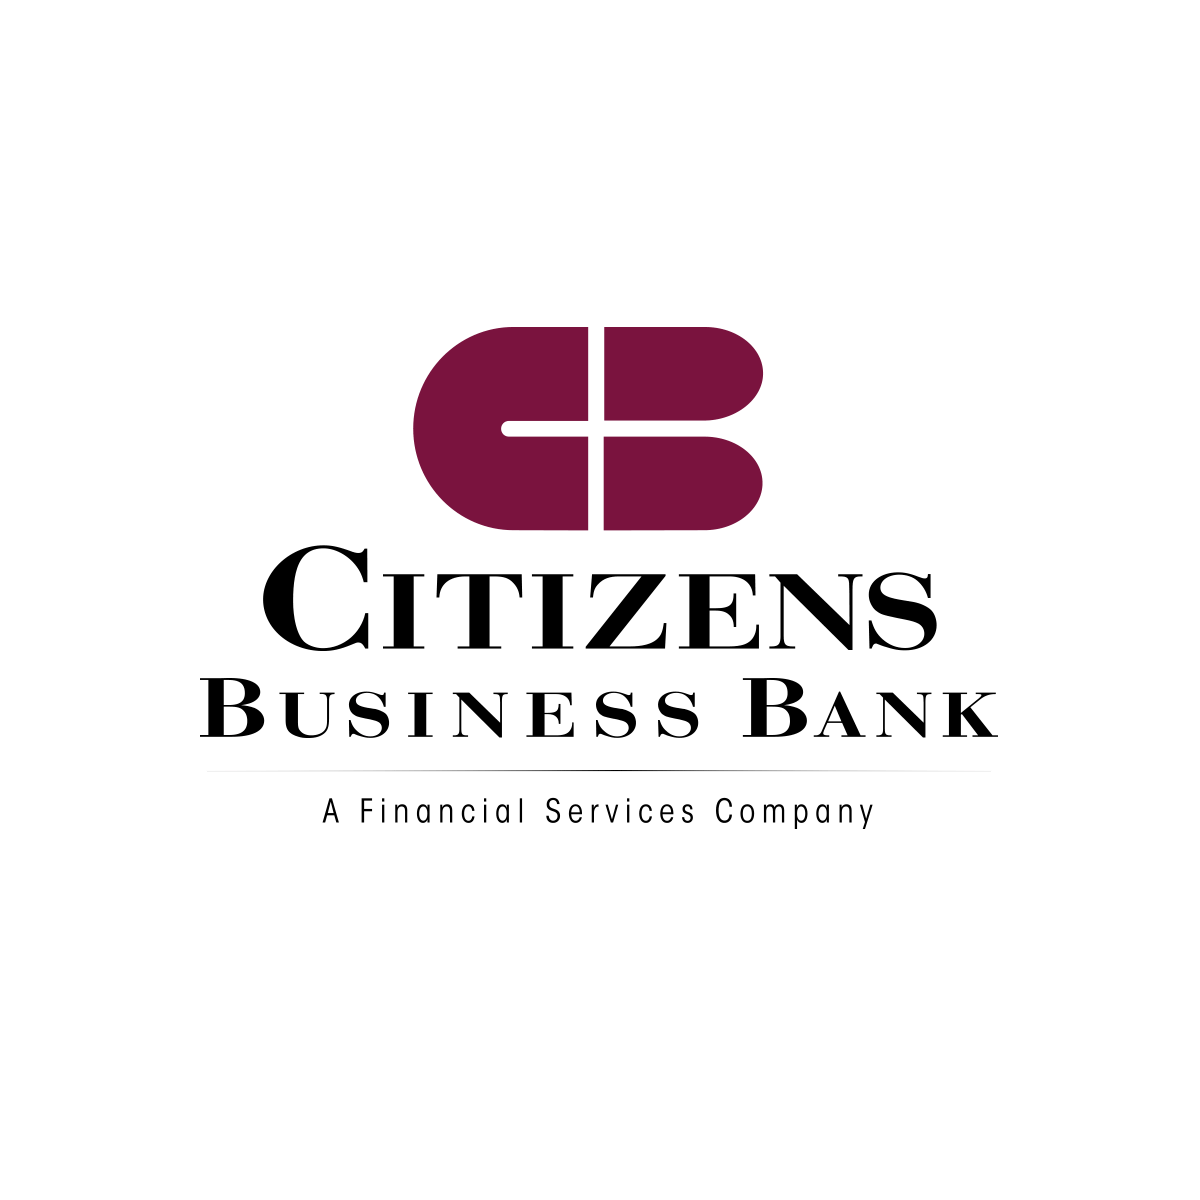 Banking and Financial Logo - Citizens Business Bank Financial Services Company